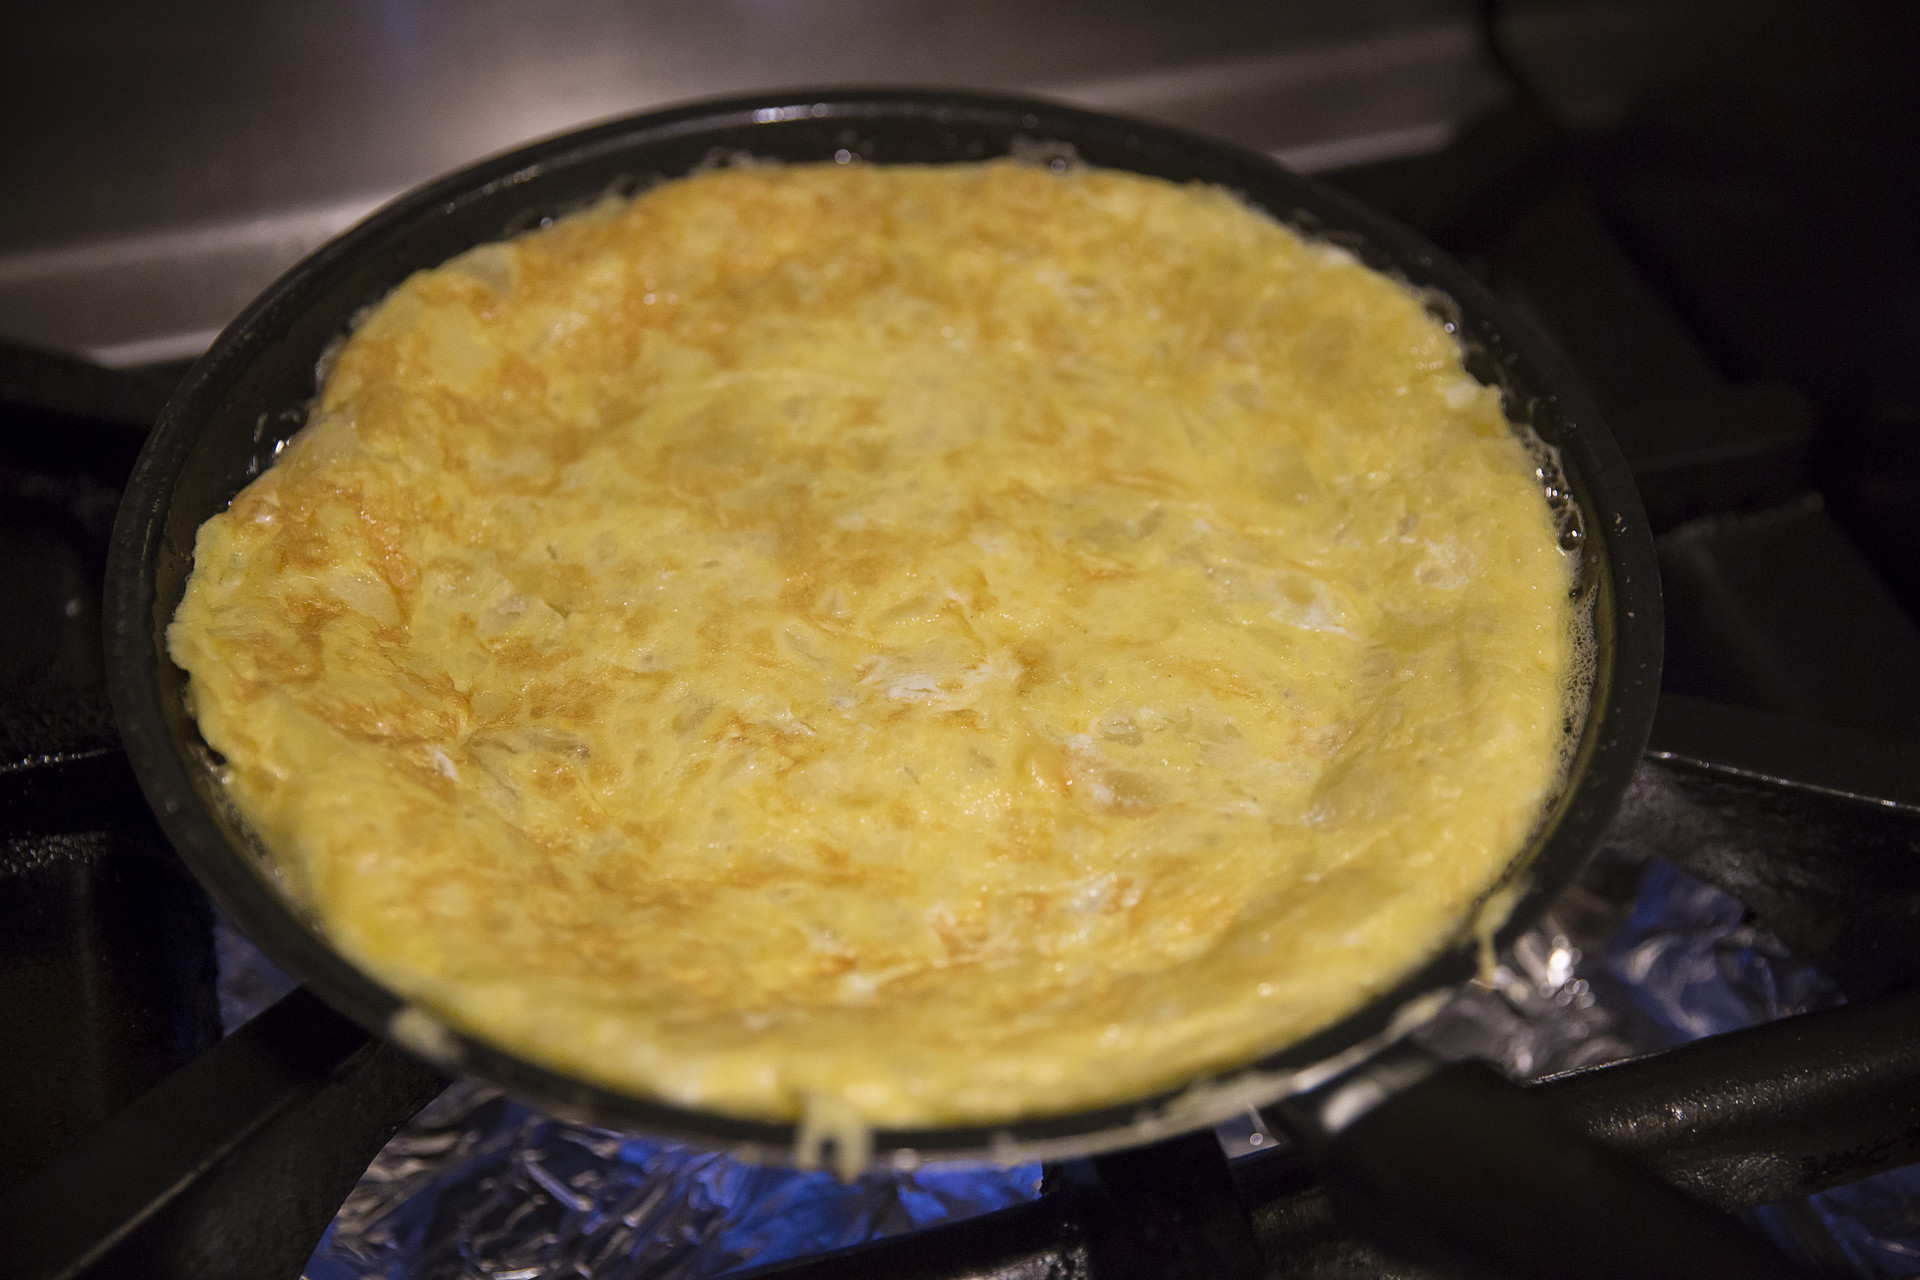 https://homecookingwithjulie.com/wp-content/uploads/2021/06/tradicional-spanish-tortilla-recipe-home-cooking-with-julie-neville4.jpg